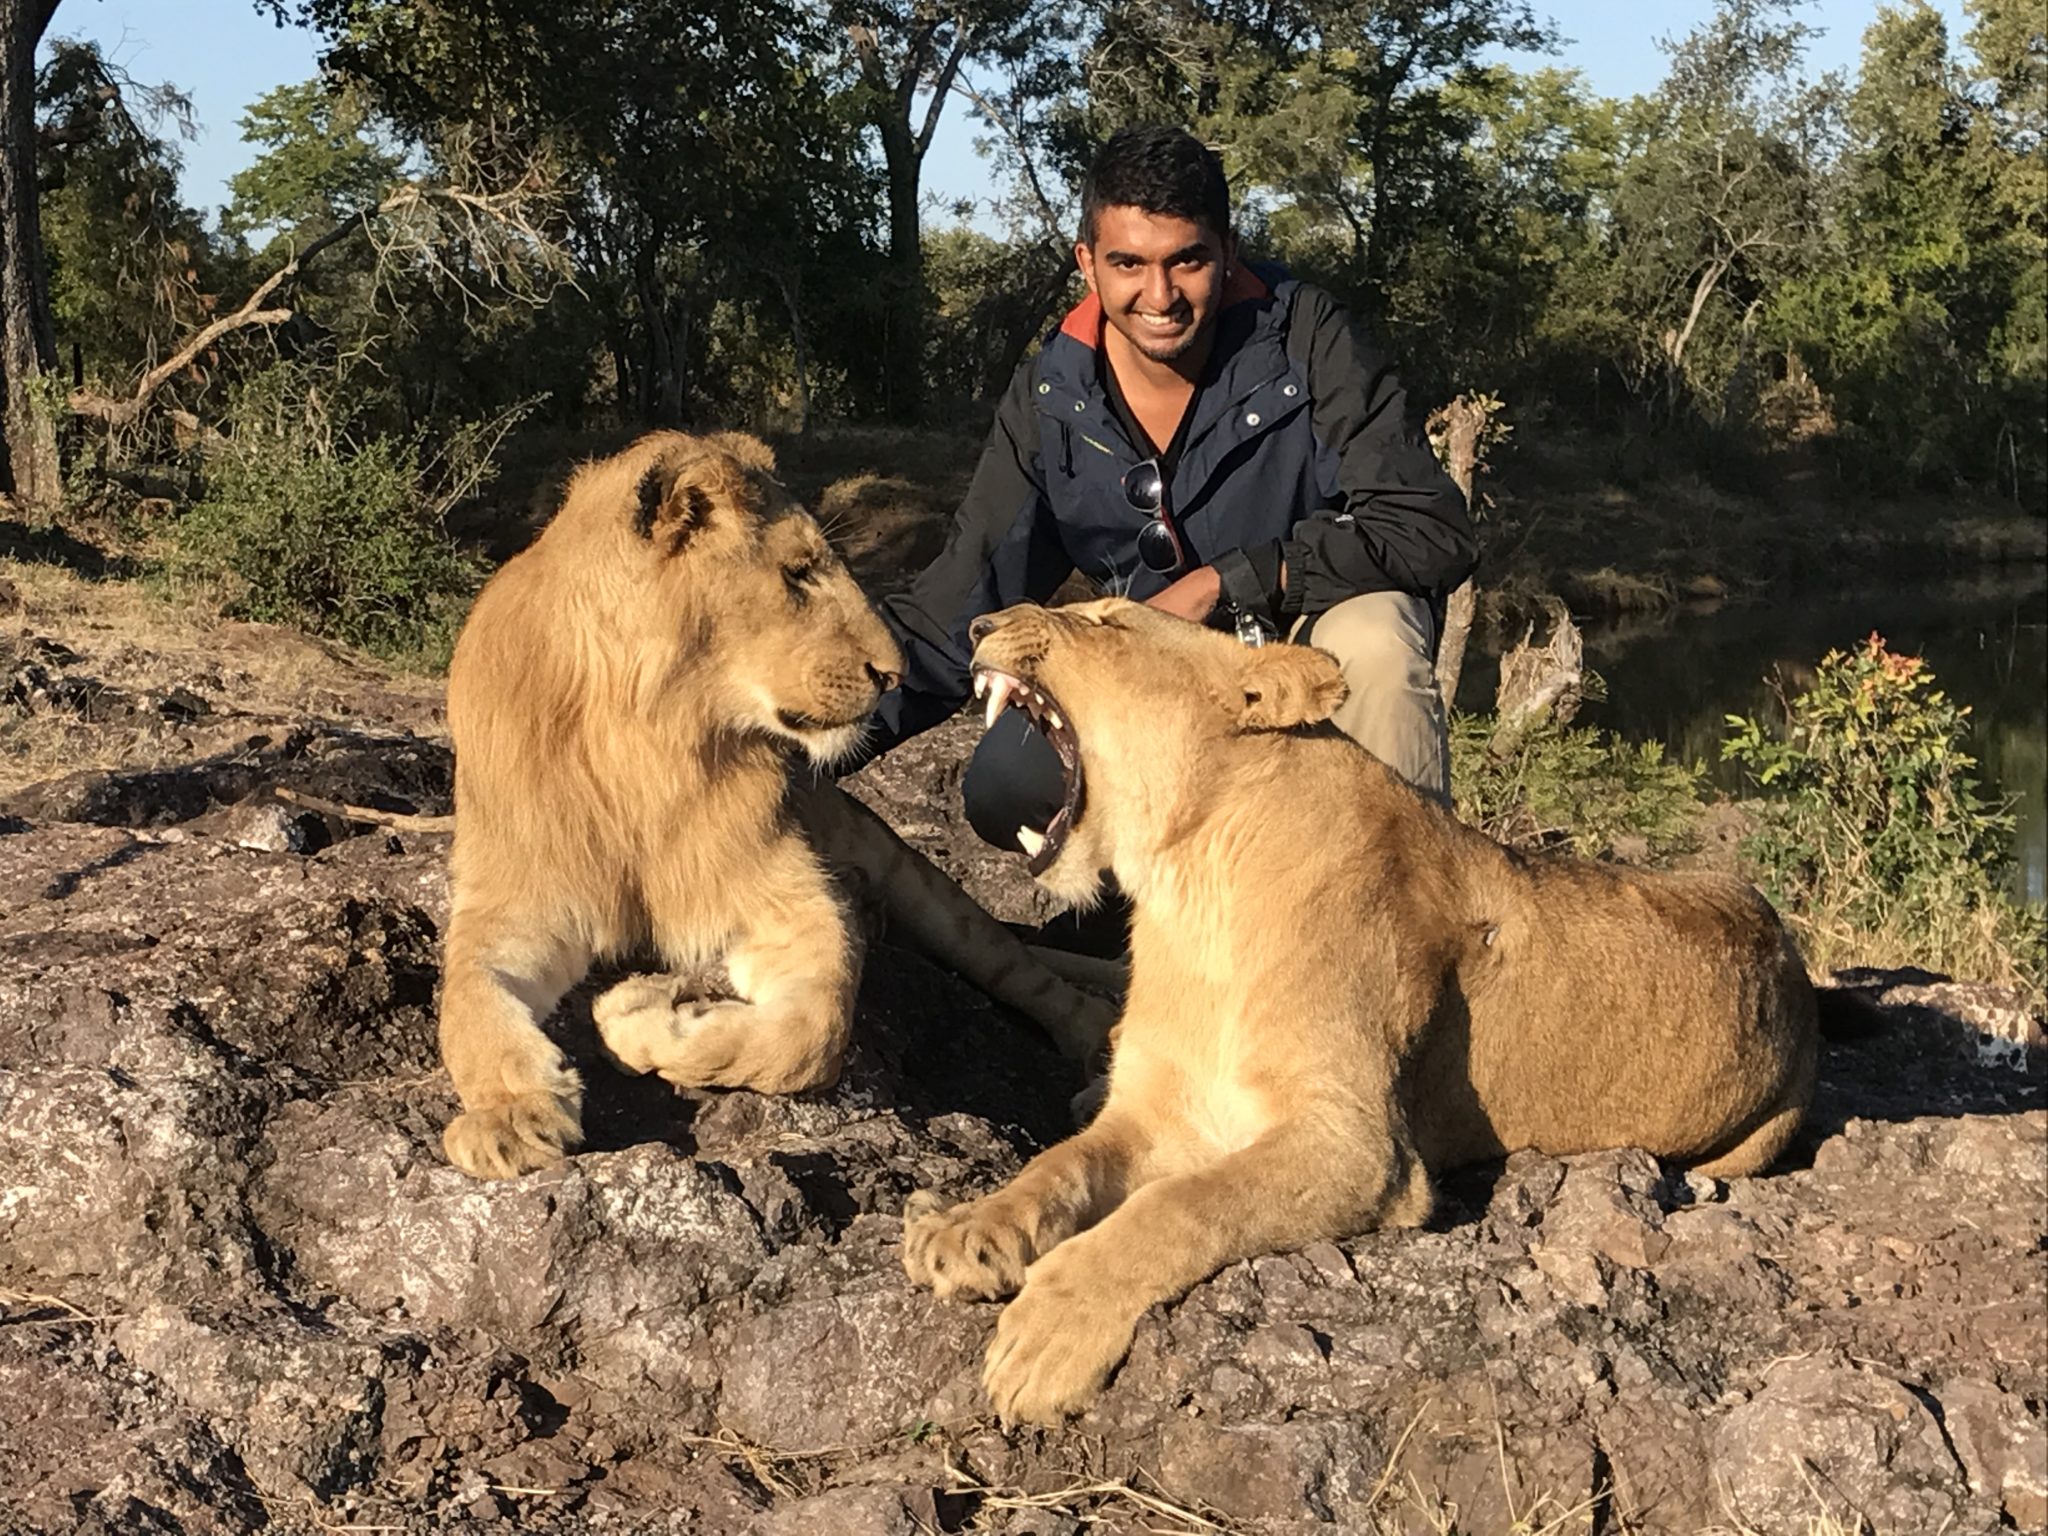 First Interaction while walking with Lions in Zimbabwe